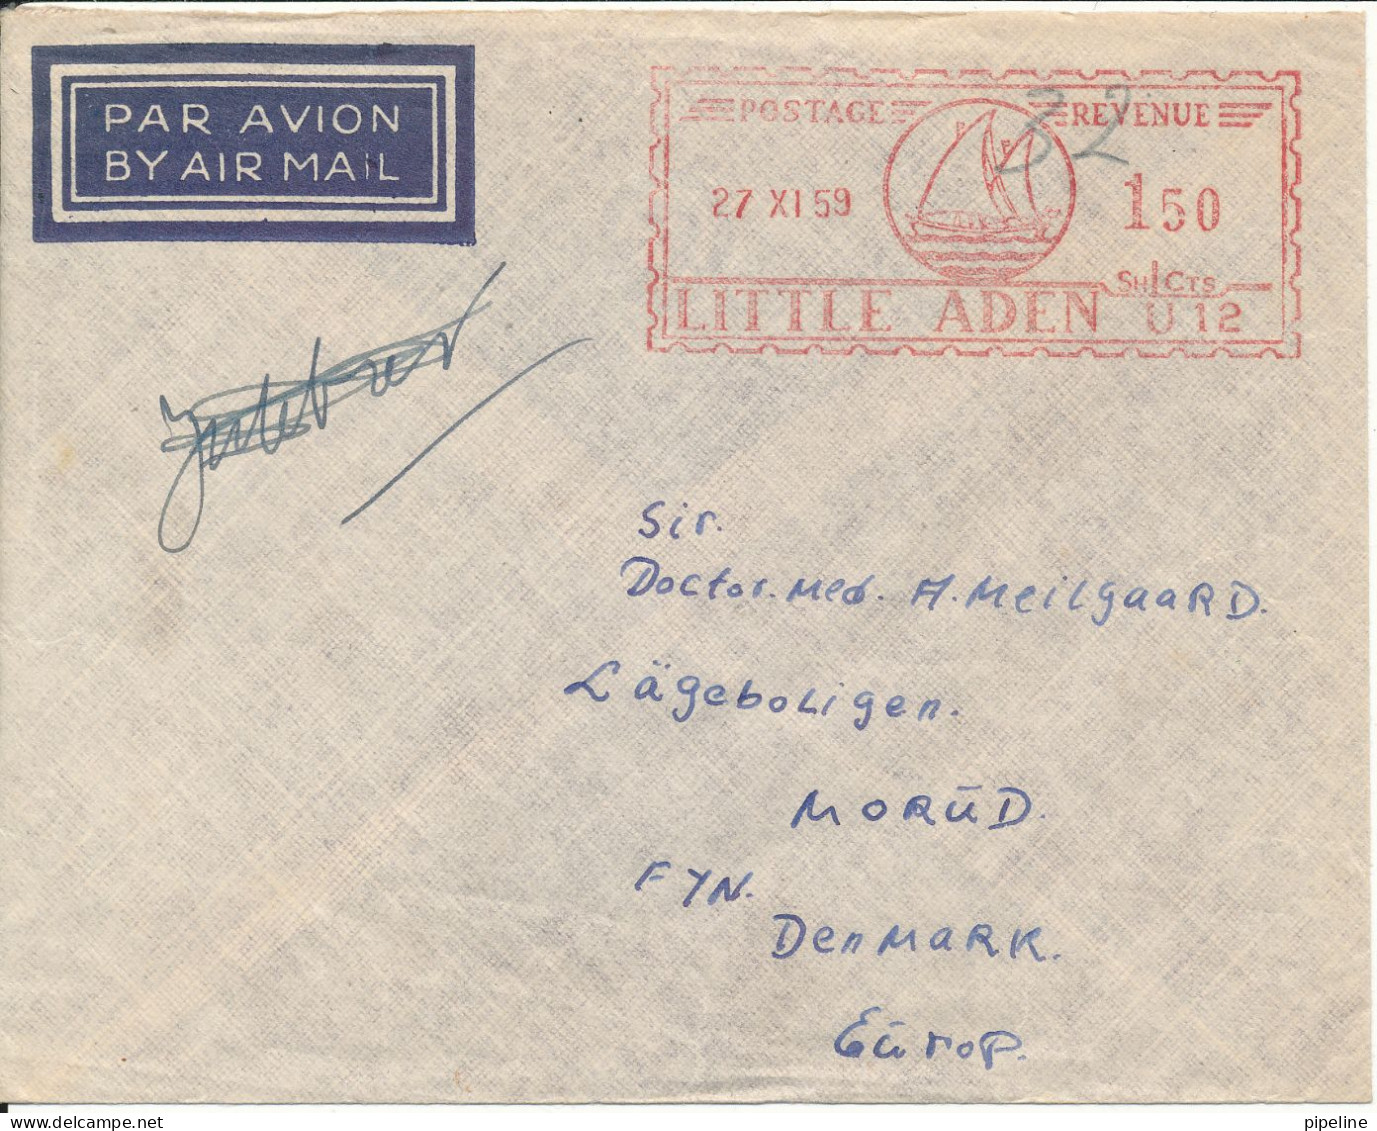 Aden Air Mail Cover With Special Red Meter Cancel "LITTLE ADEN" Sent To Denmark 27-11-1959 - Aden (1854-1963)